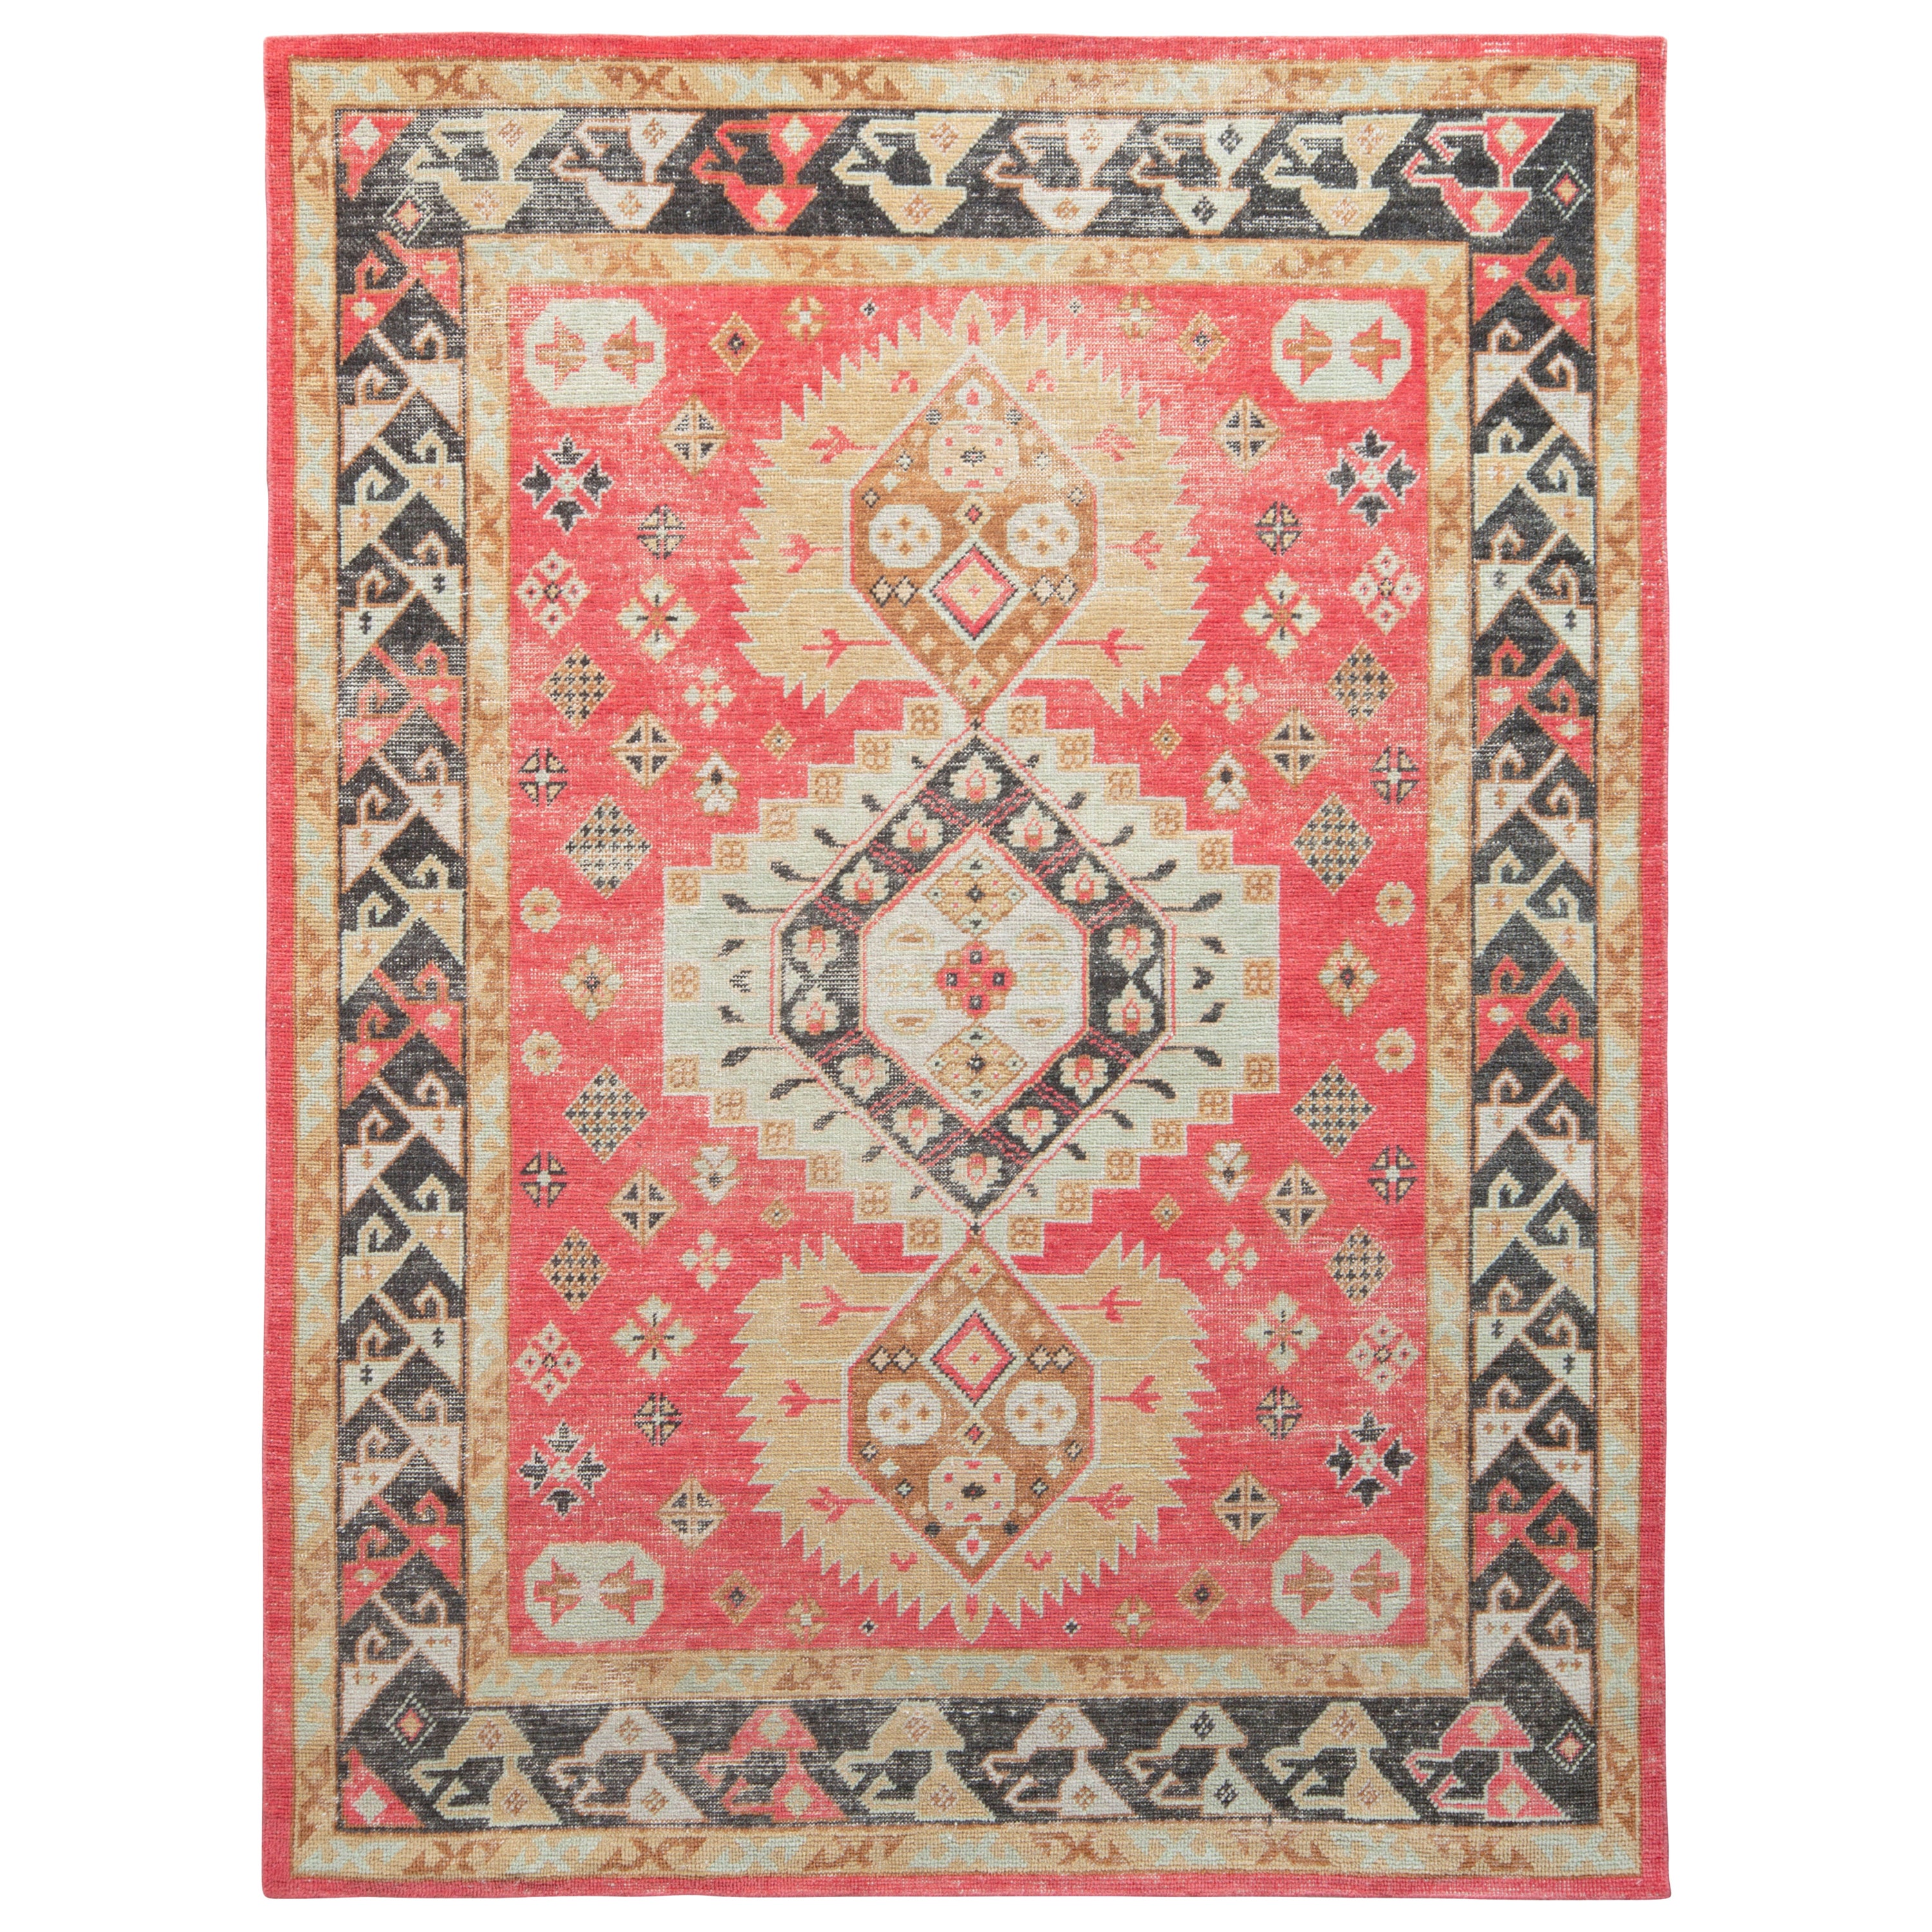 Rug & Kilim’s Distressed Classic Style Rug in Red, Beige-Brown Medallion Pattern